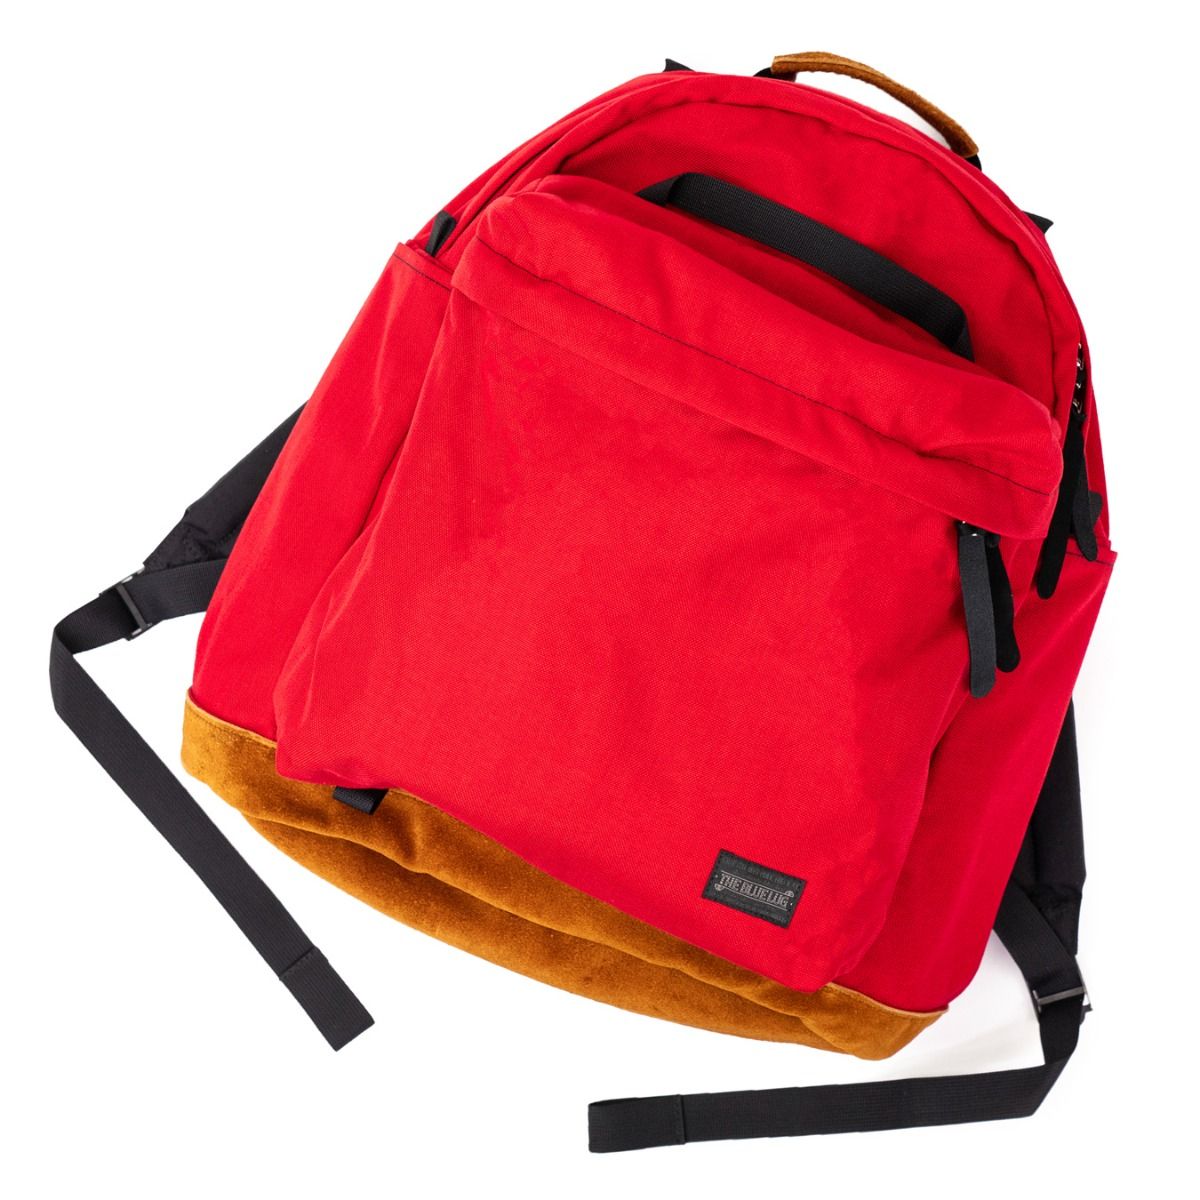 BLUE LUG* THE DAY PACK (red/brown suede) - BLUE LUG ONLINE STORE